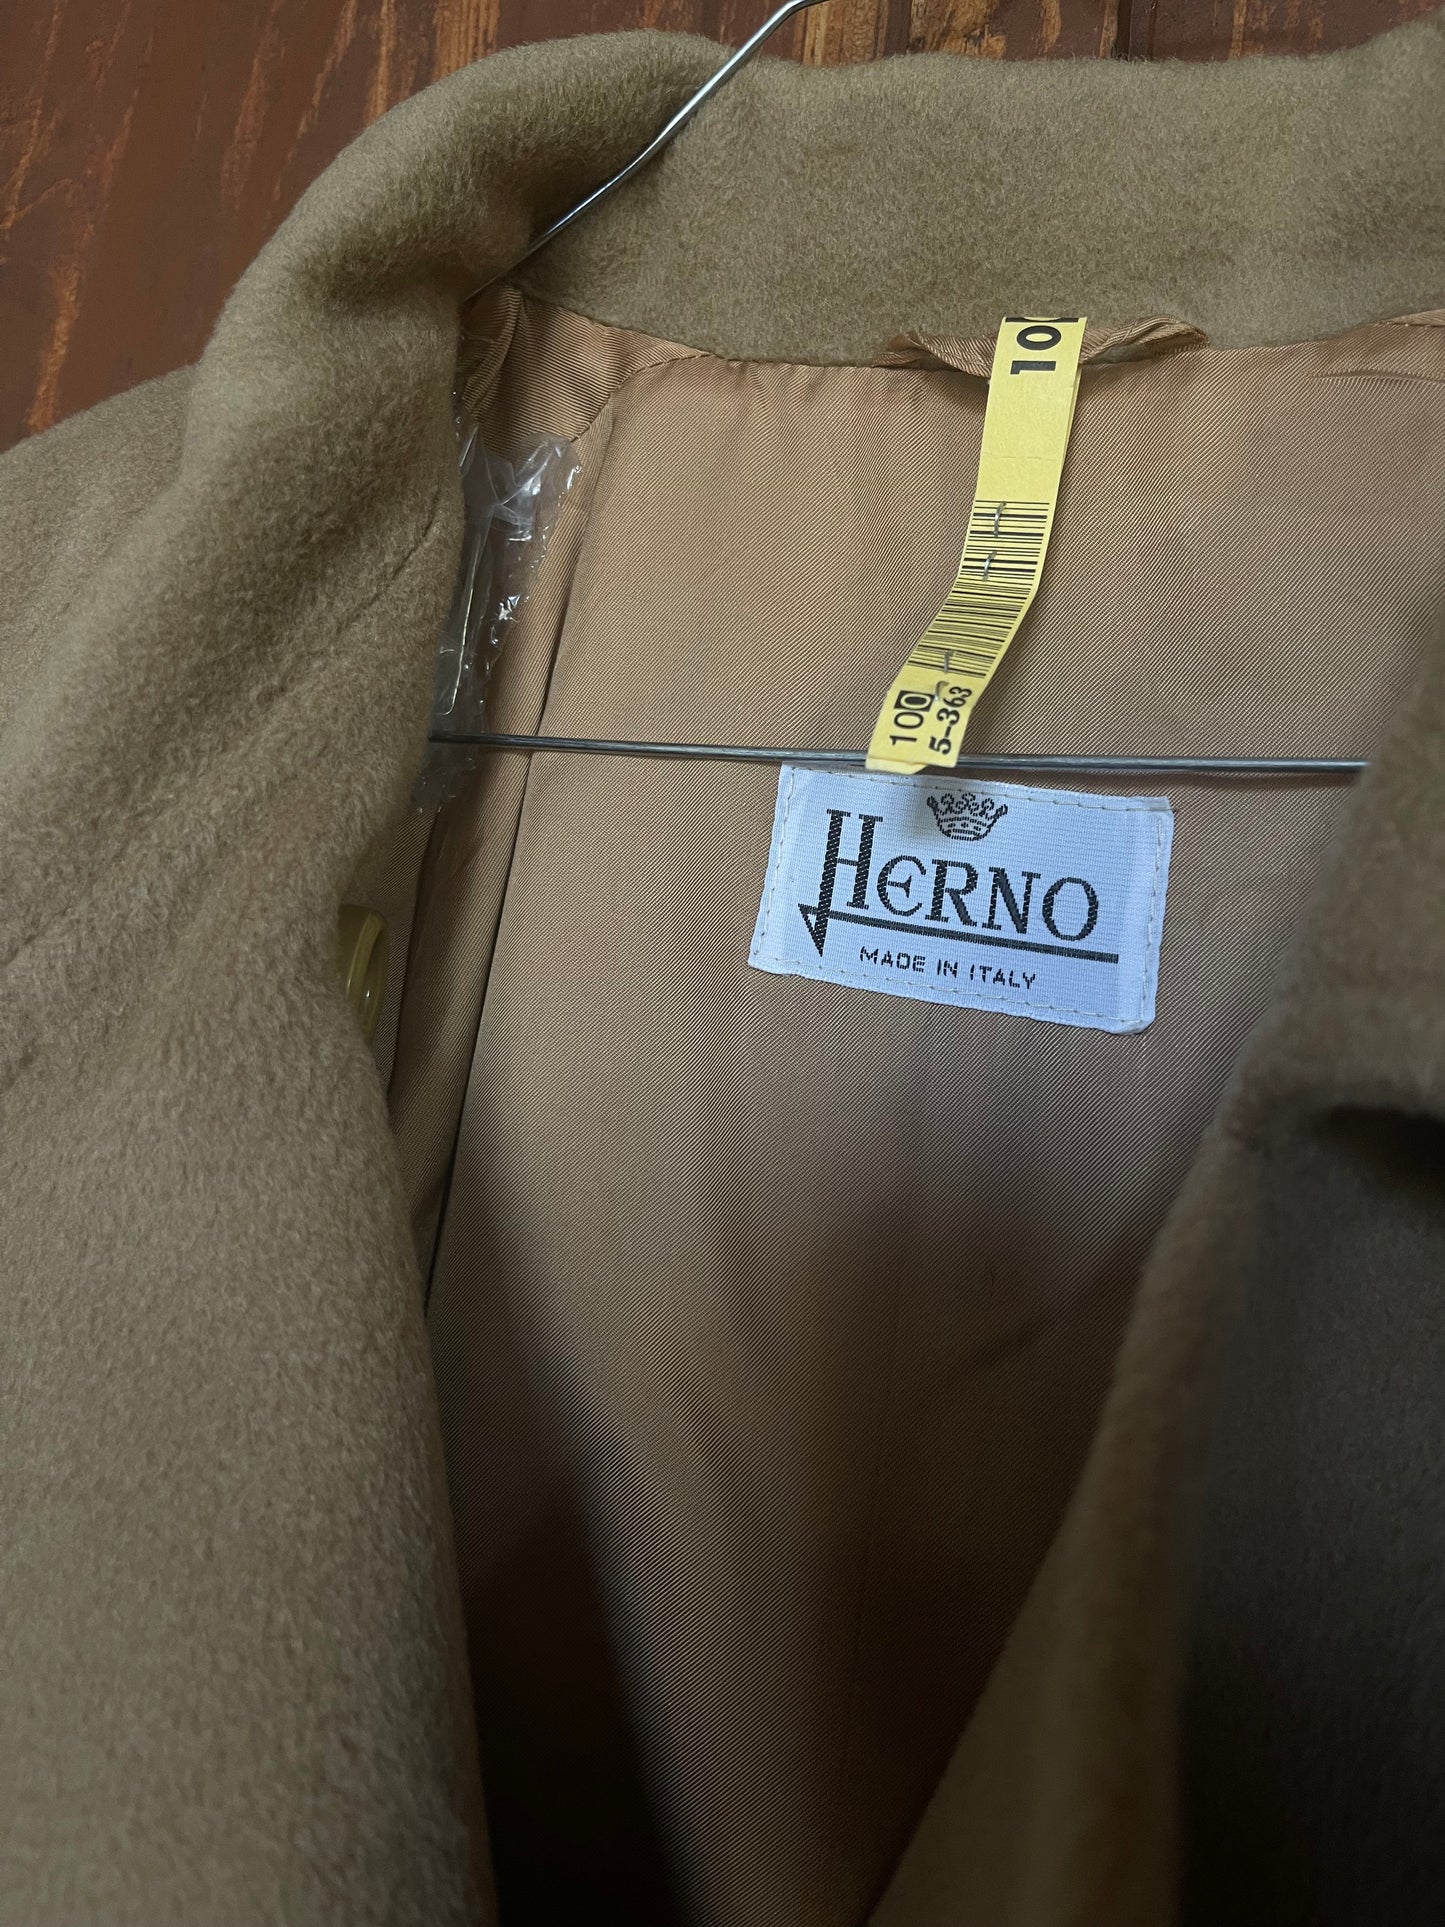 The camel coat by Herno